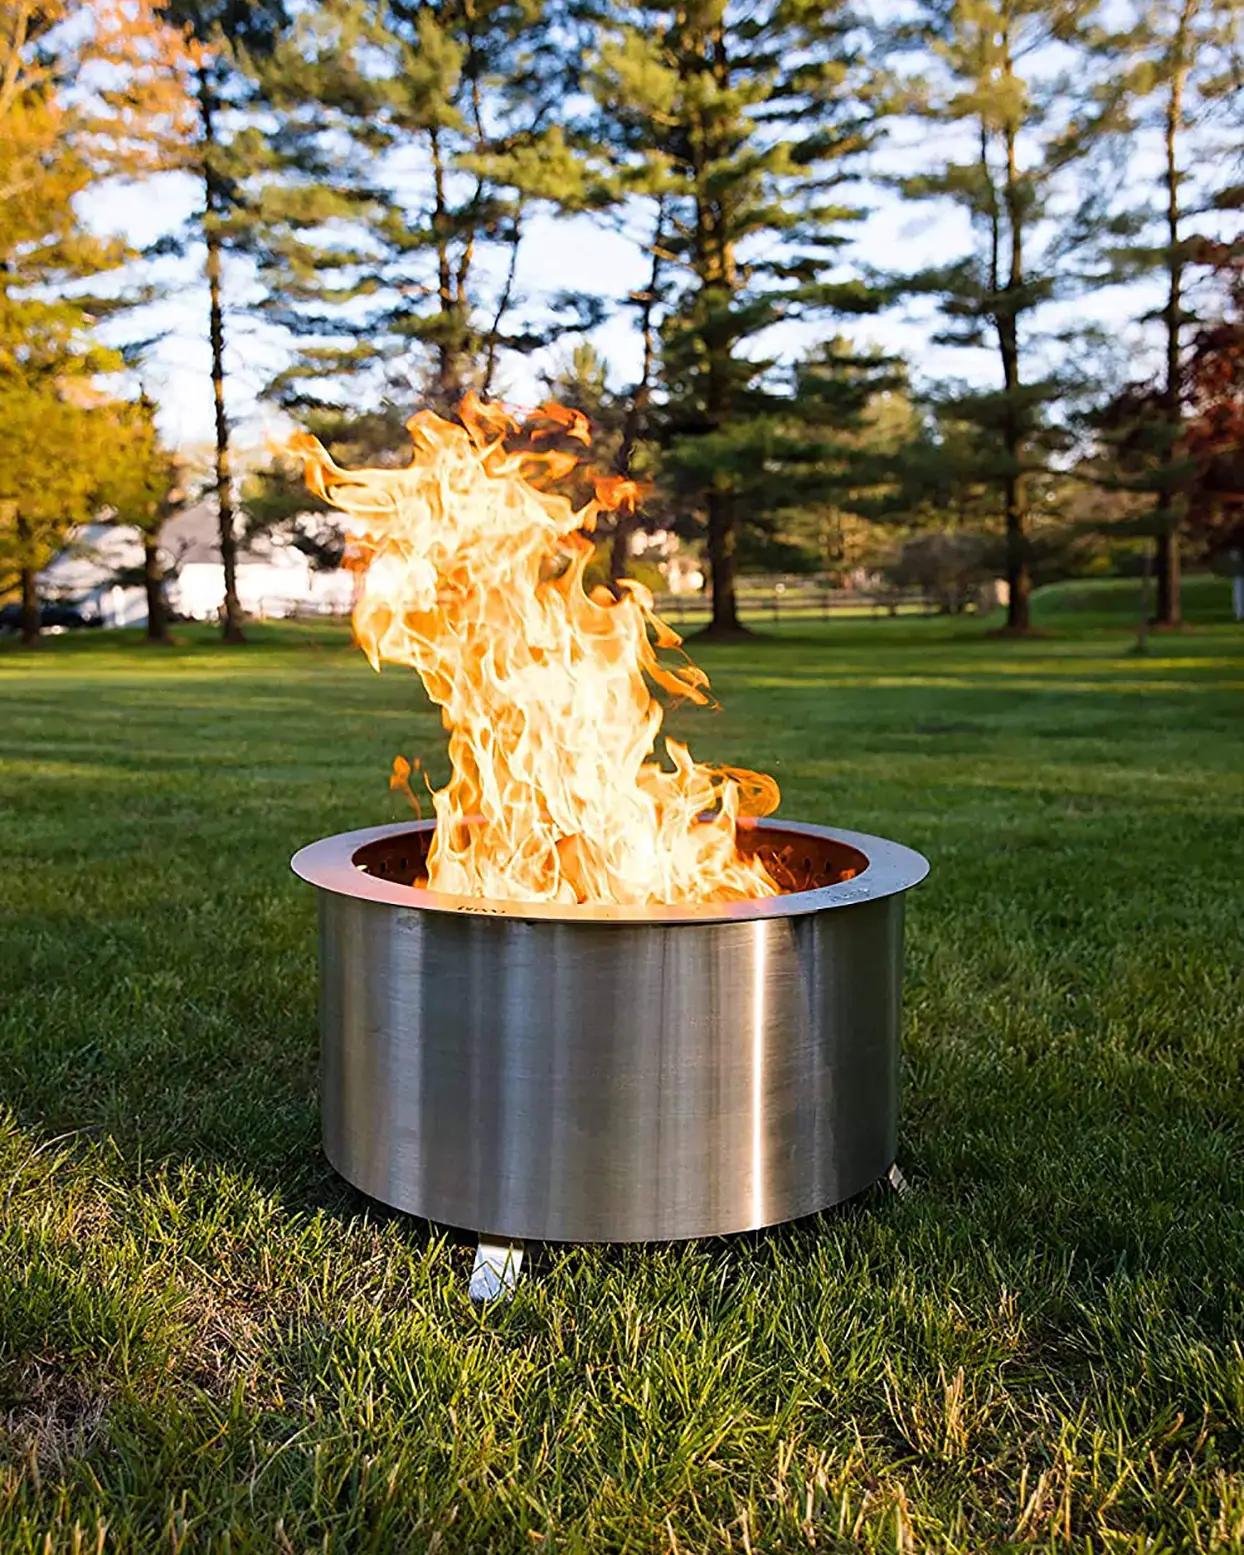 Best Smokeless Fire Pit The Complete, How To Have A Smokeless Fire Pit